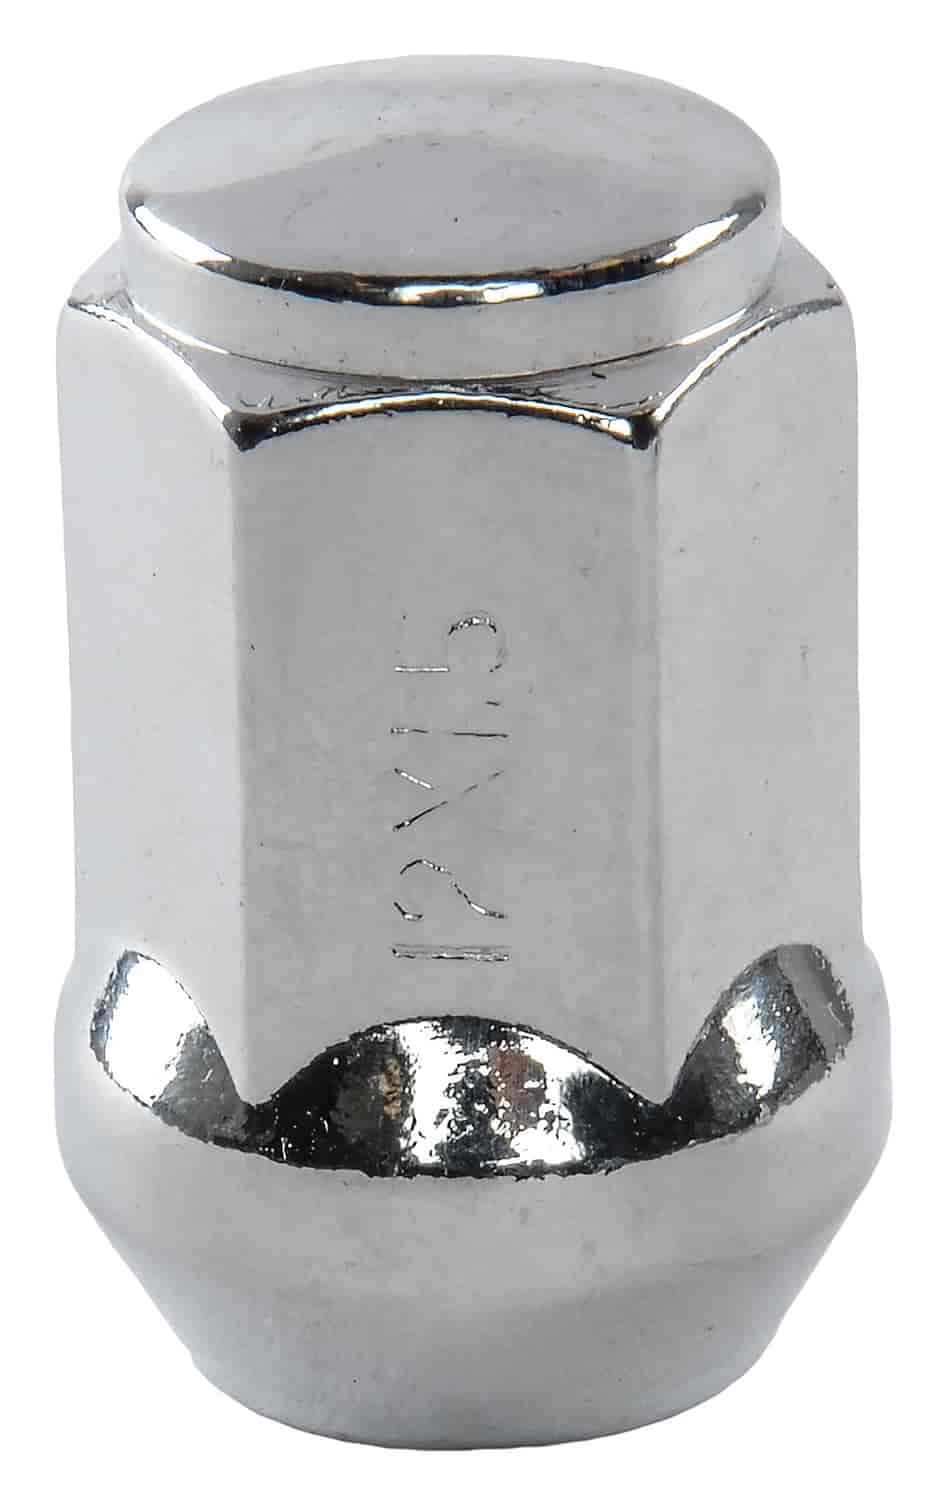 JEGS 65210: Bulge Acorn Lug Nuts Short Closed-End 12mm x 1.5 RH Thread  1.380 in. Long Steel Chrome Finish Set of JEGS